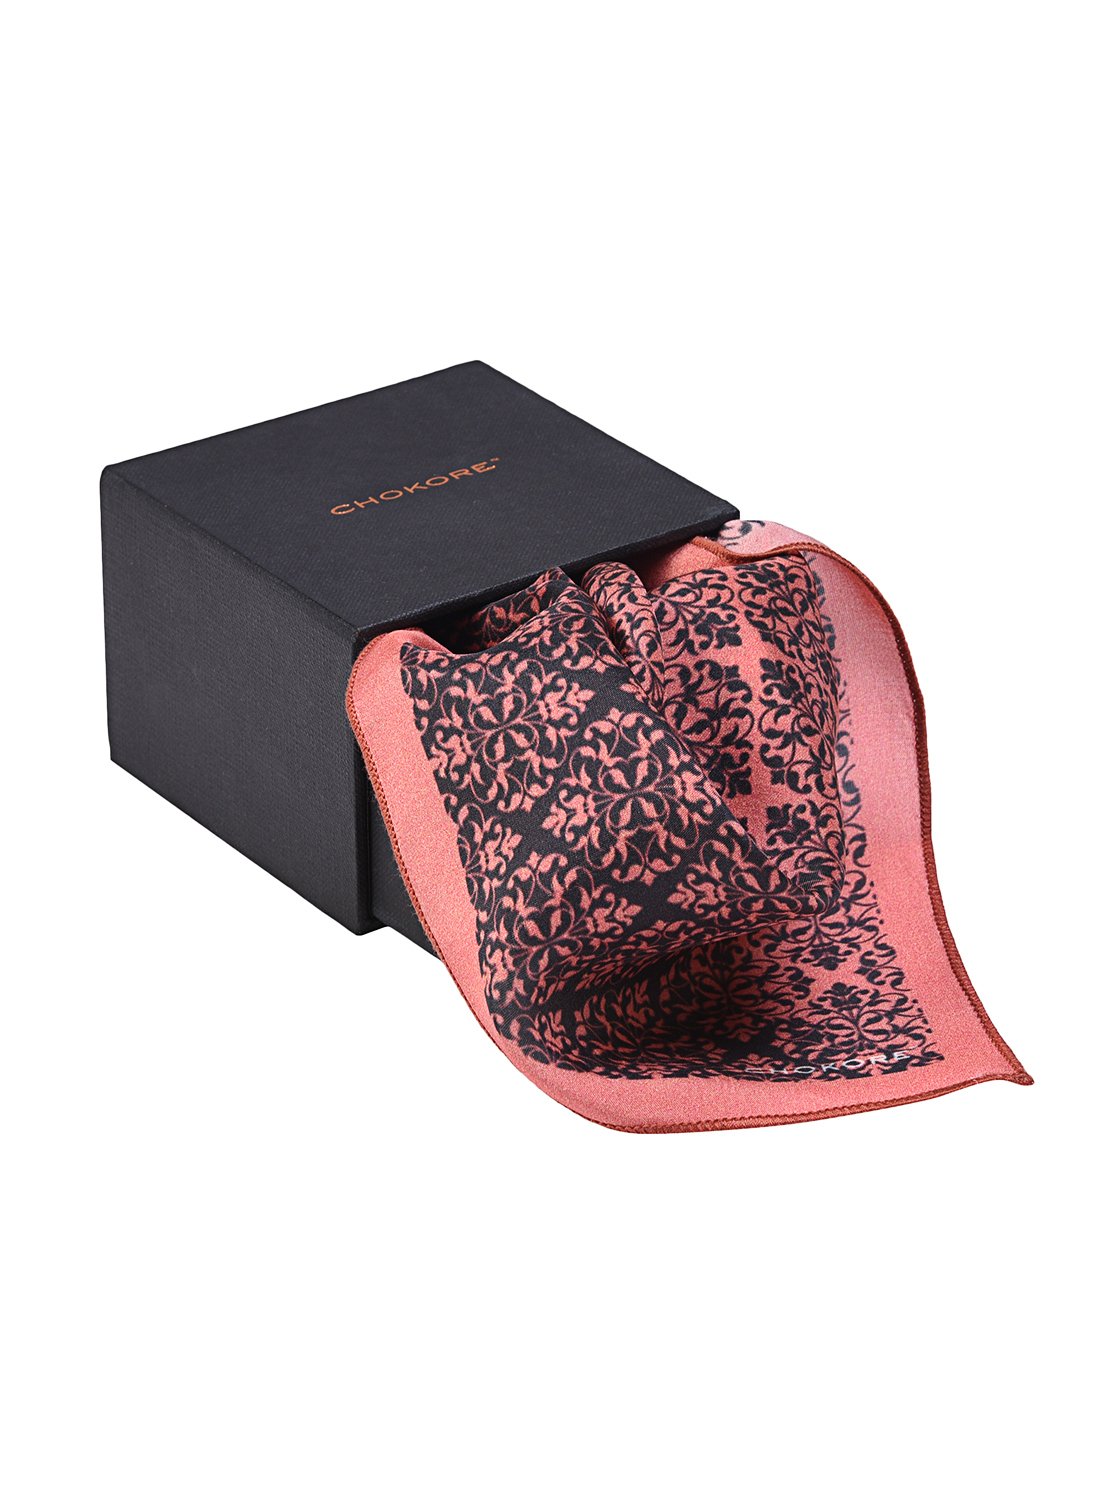 Chokore Marsela and Black Silk Pocket Squares from Indian at Heart collection